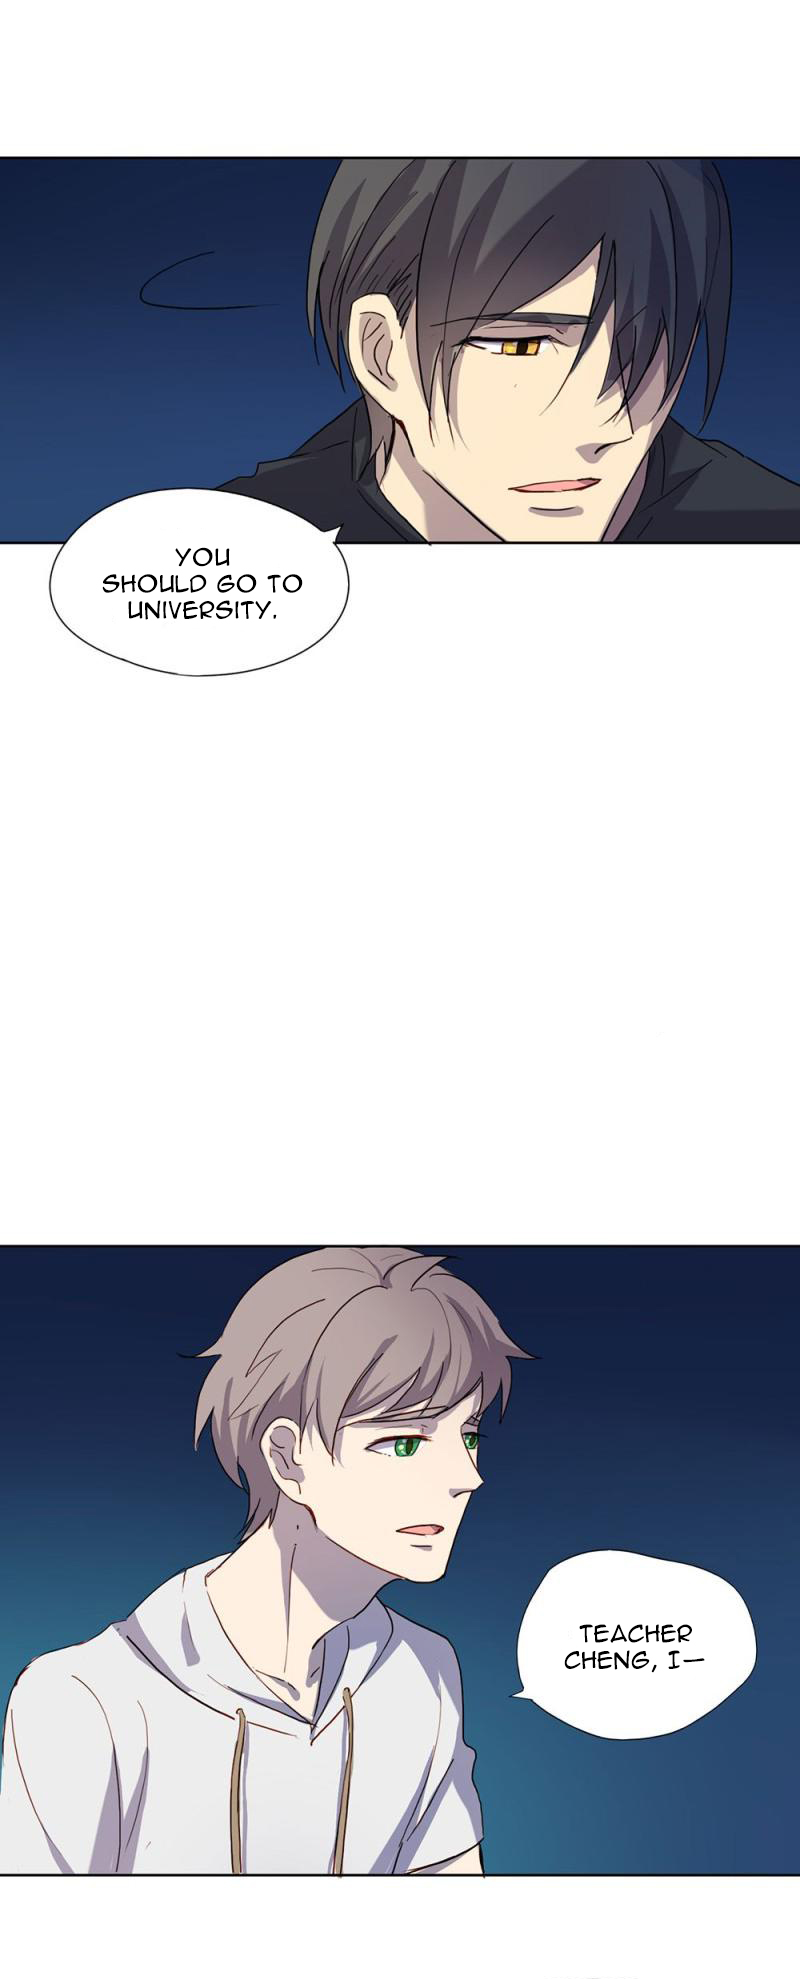 Lock You Up Vol.1 Chapter 17: You should go to university